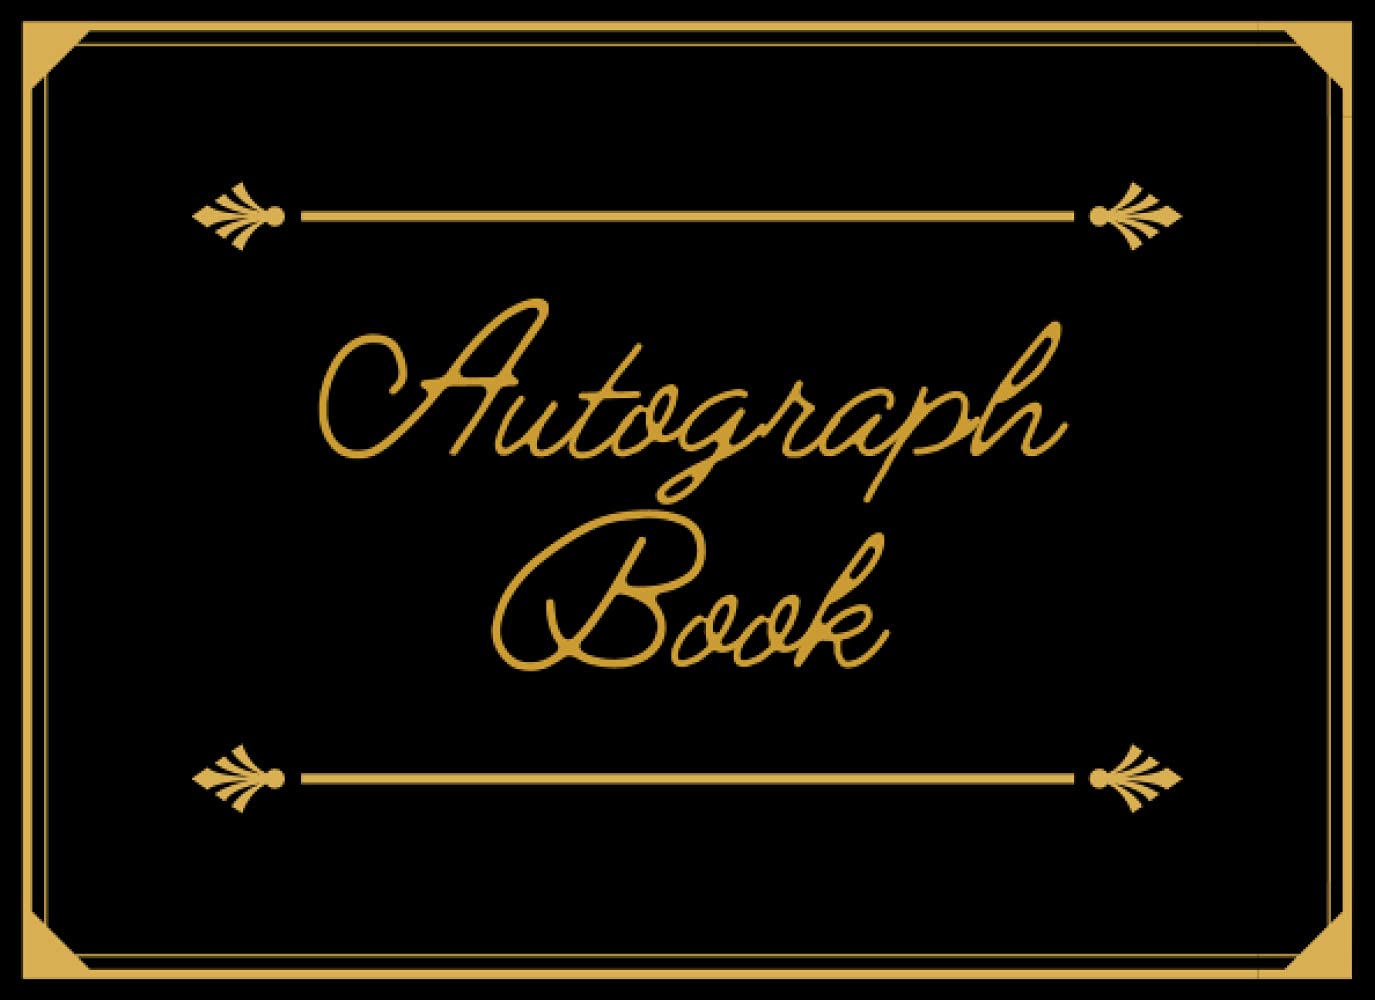 61DgdaxvaPS - Autograph book: Collect Autographs and Happy Memories | Blank Pages for Keepsake Signatures Memorabilia Album Gift Trip Memory Book | Classroom, Celebrities, Sports, Graduation | Black & Gold Book